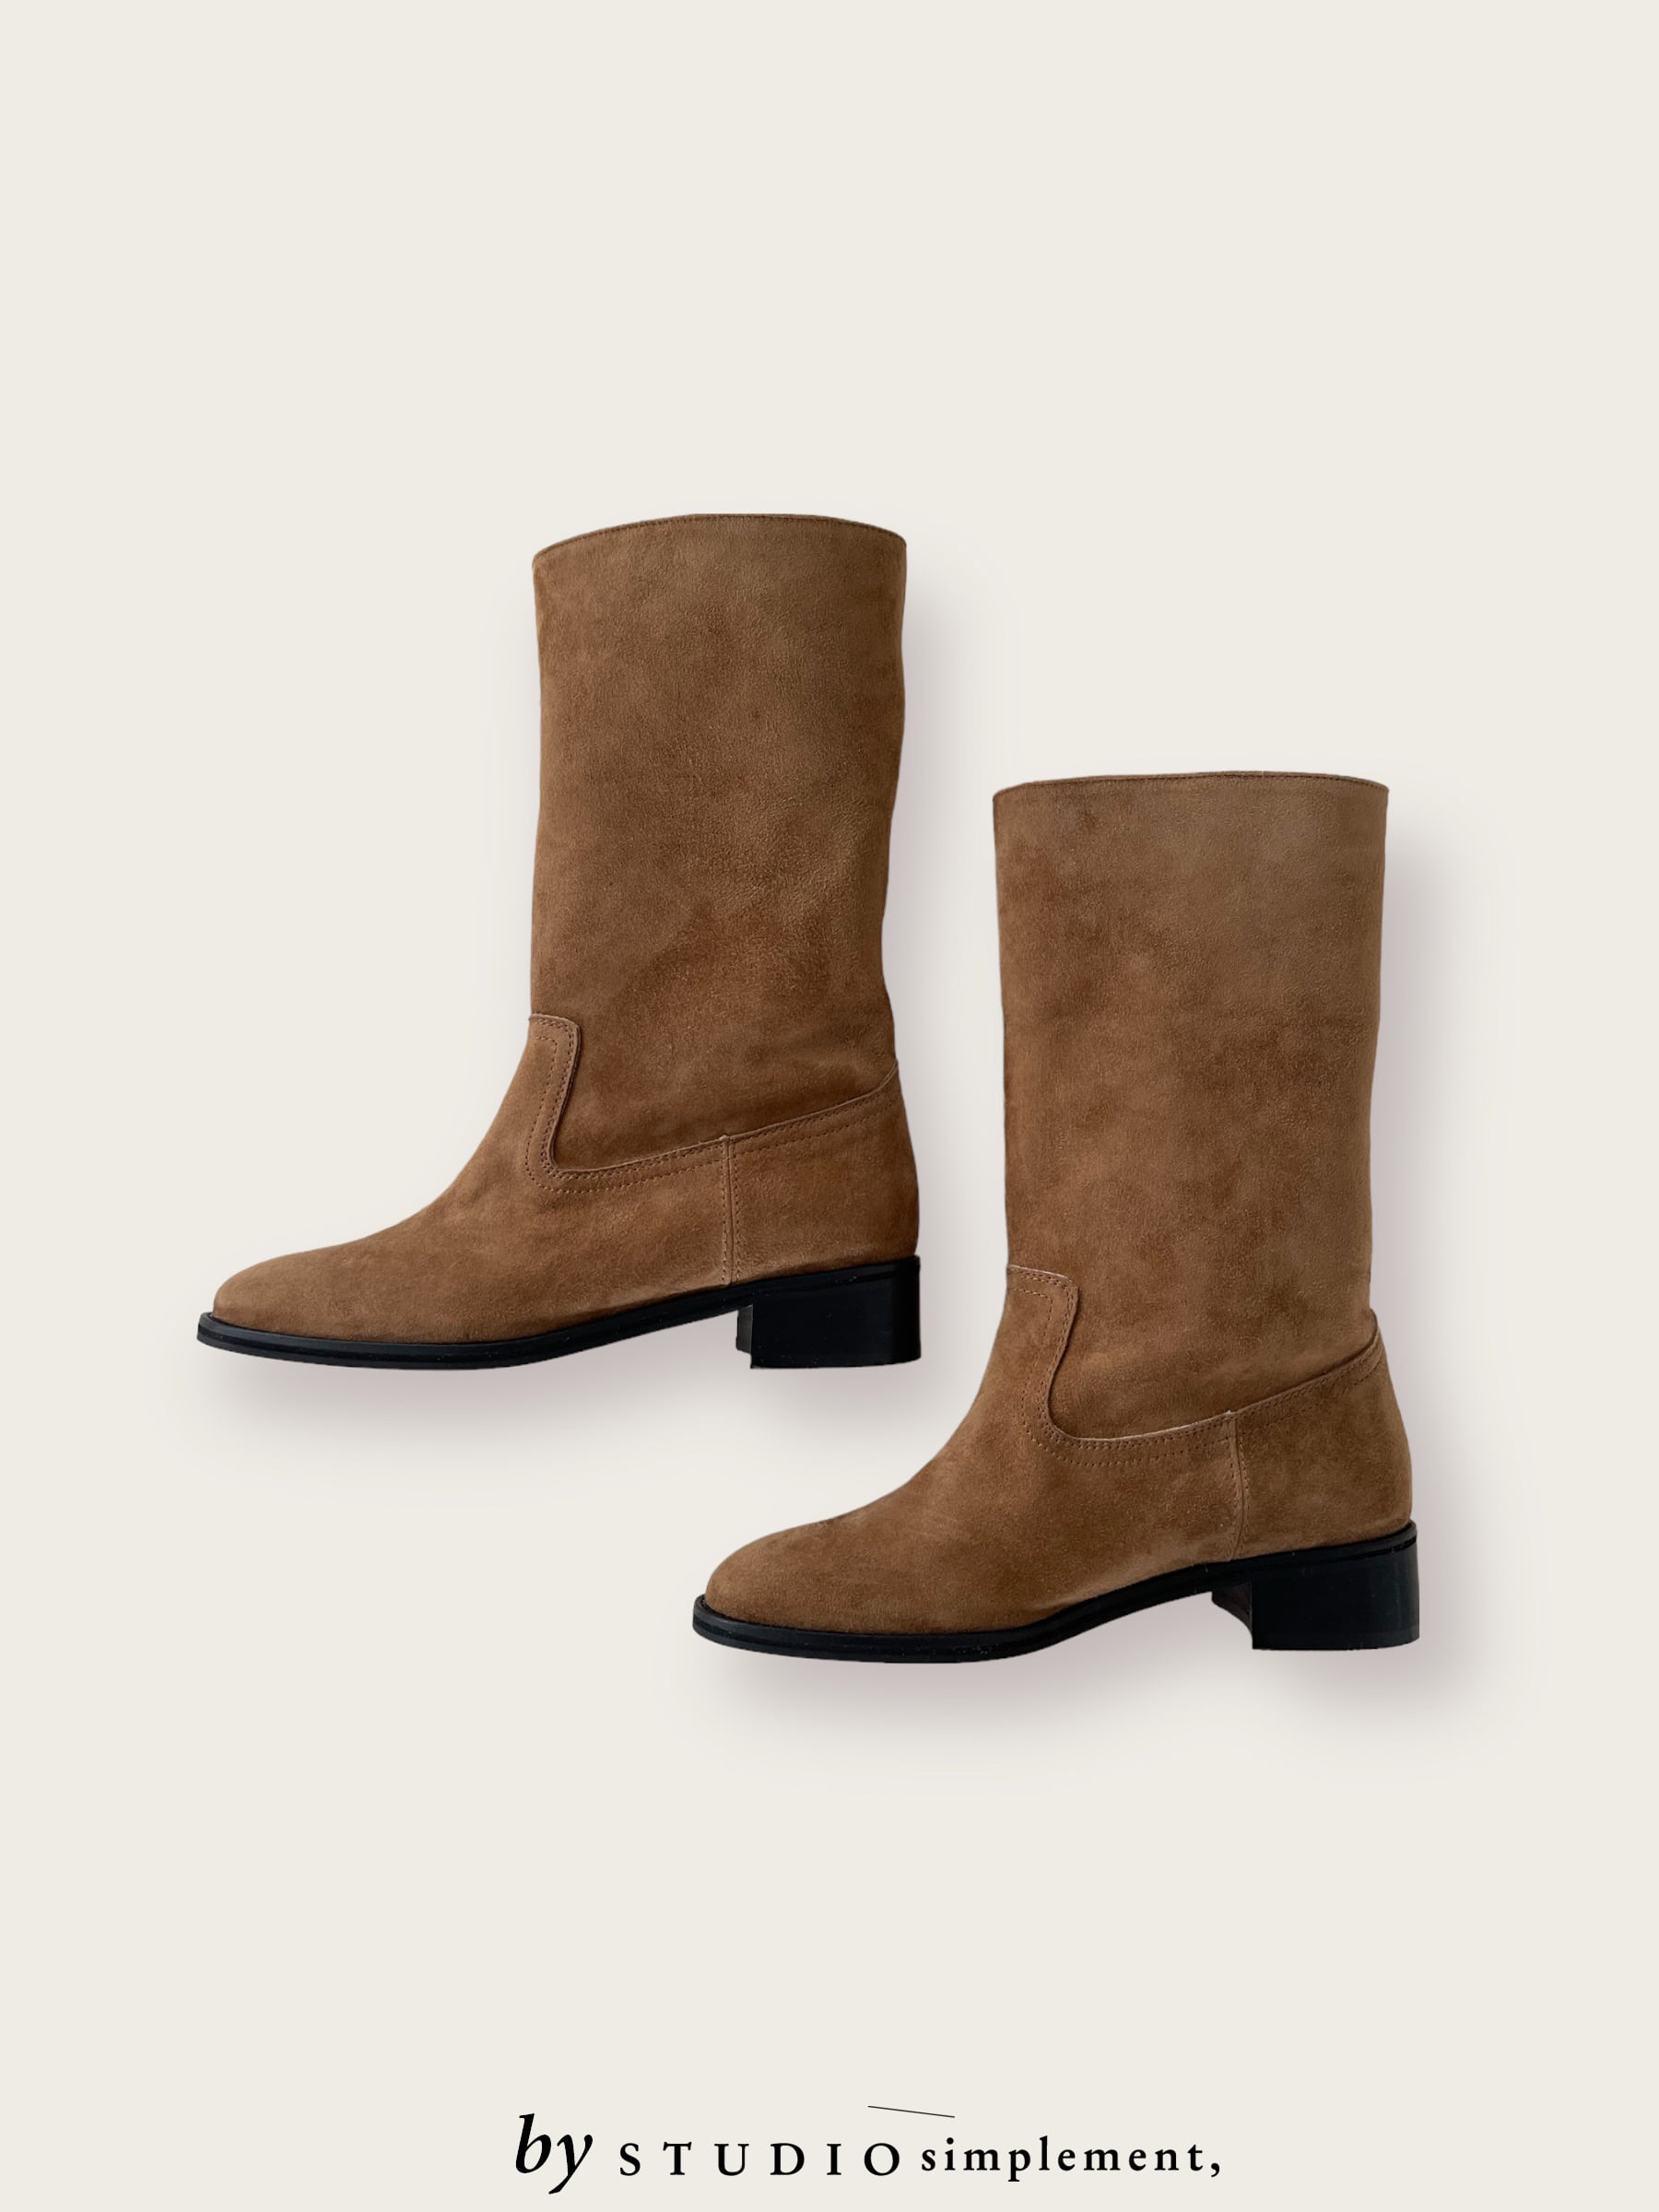 N.Half Boots by S simplement, - taupe suede